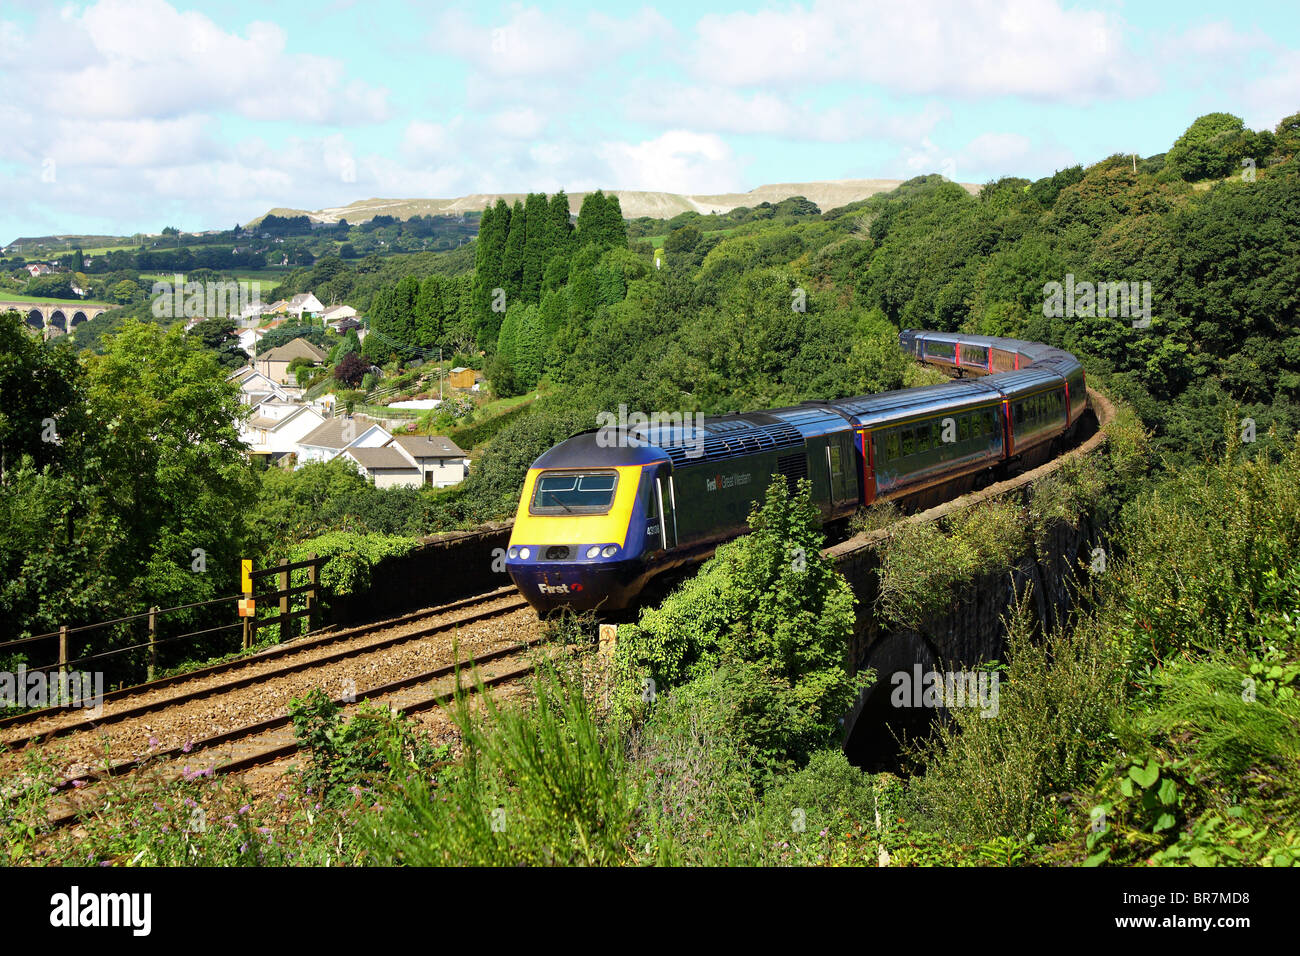 125 Express train crossing St Austell Viaduct, Cornwall. Direction of travel towards us. Stock Photo